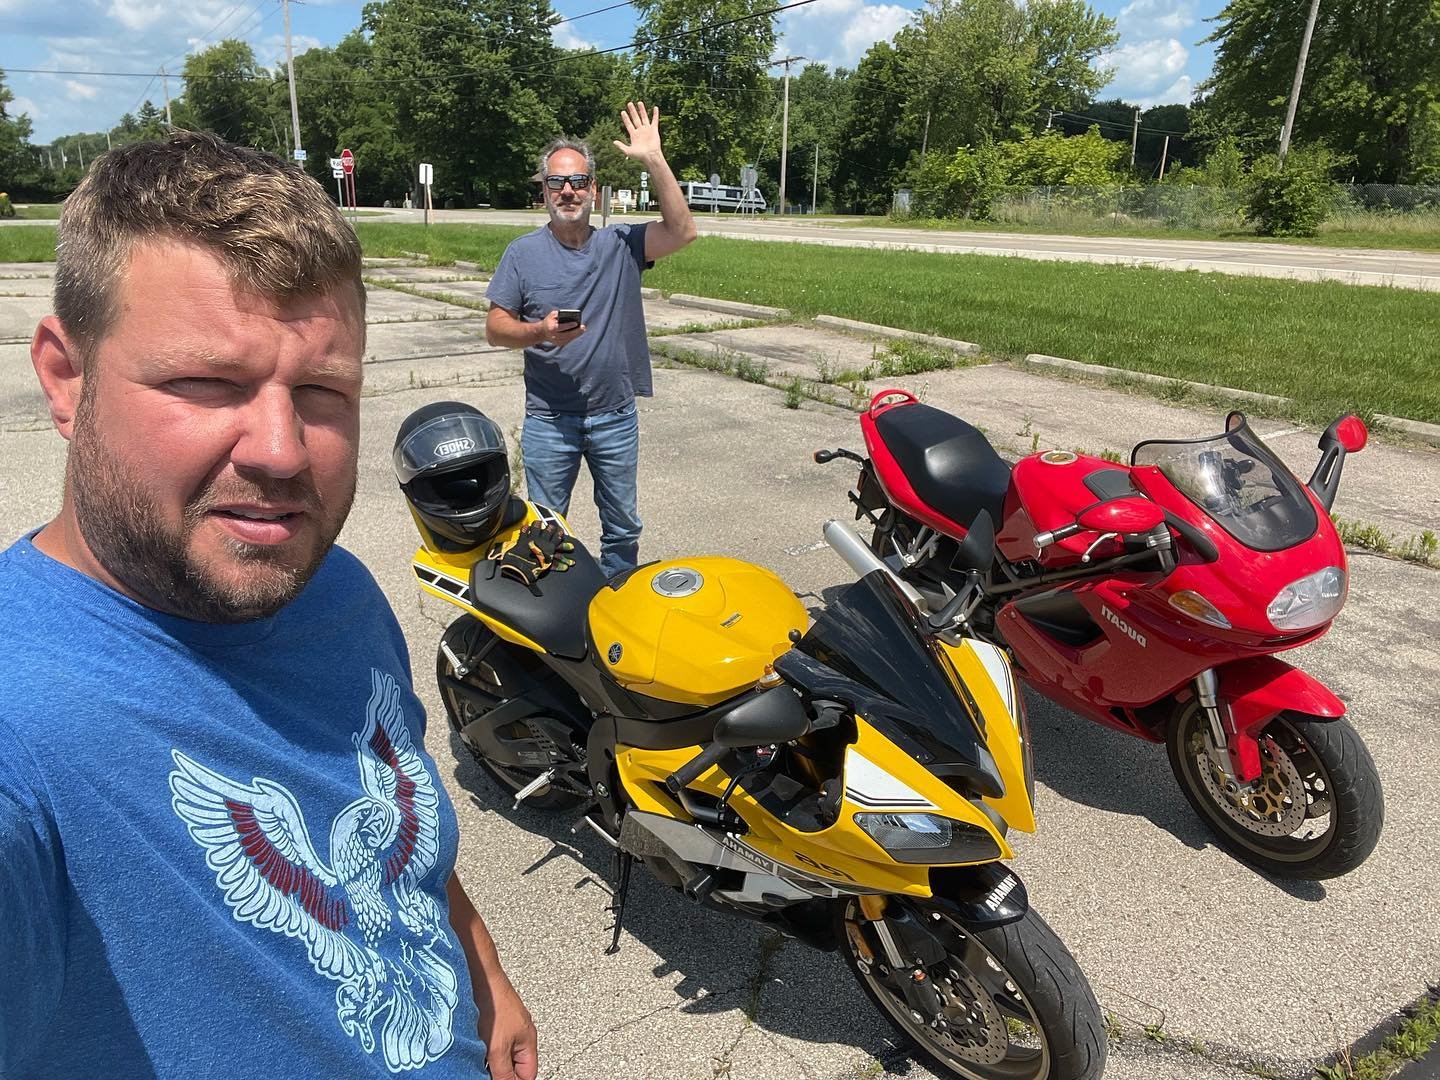 Catsup and mustard hitting the streets, raising hell and causing mahem. Live to ride, ride to live  🏍️ ☠️